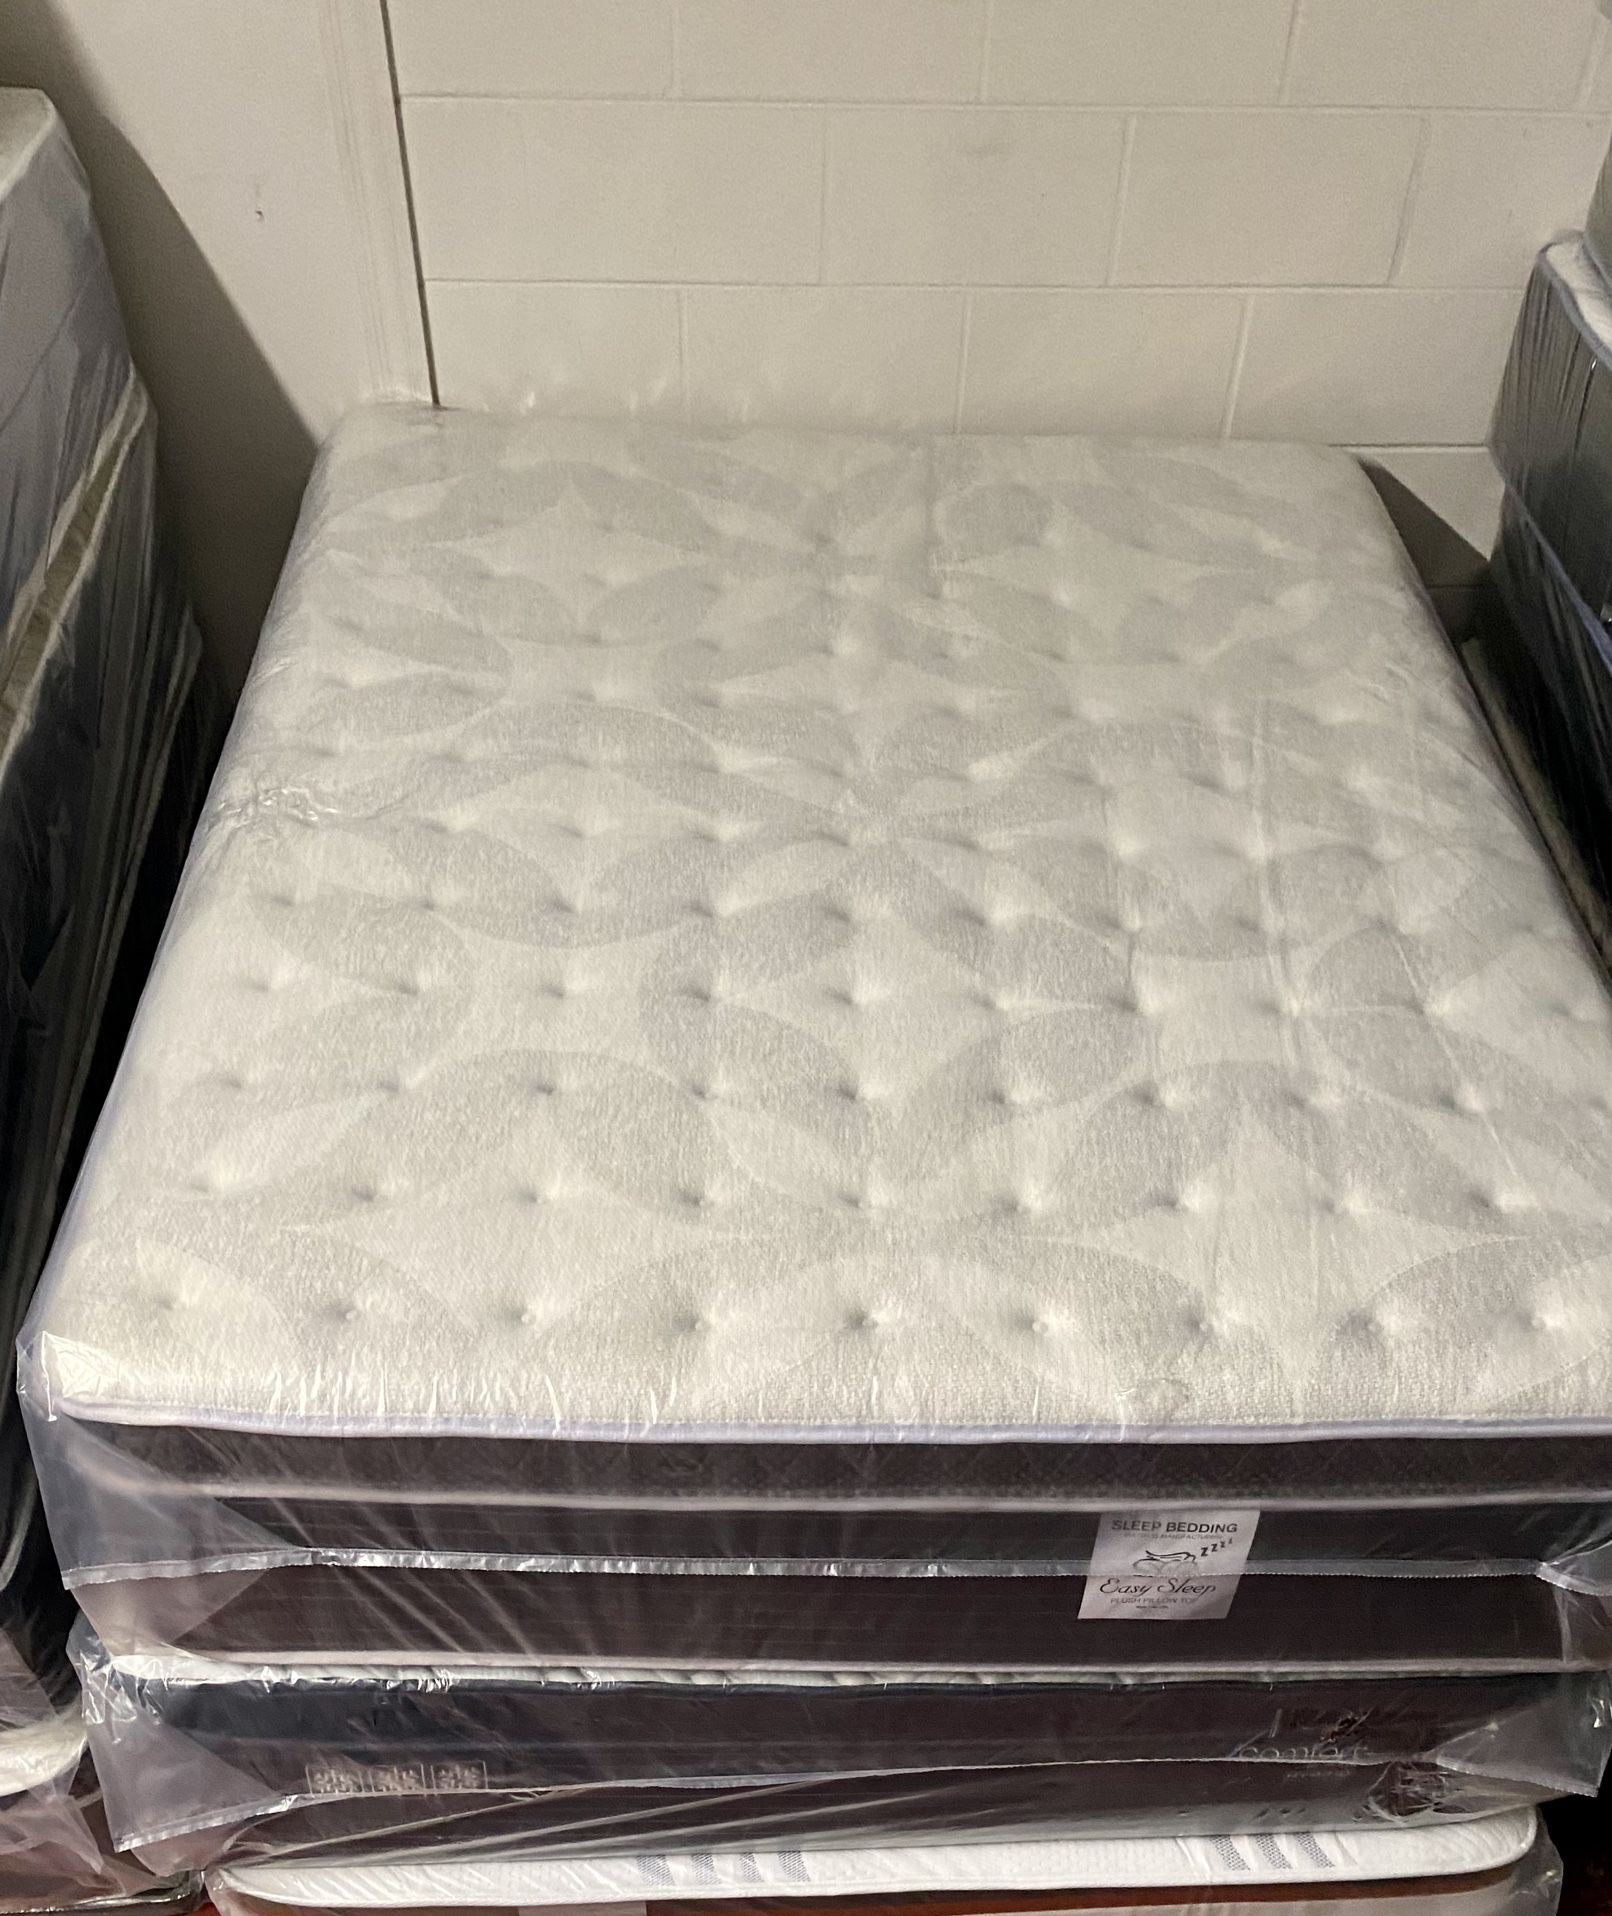 Queen Size Mattress 14 Inch Thick With Pillow Top Of Gran Comfort And Box Springs New From Factory Available All Sizes Same Day Delivery